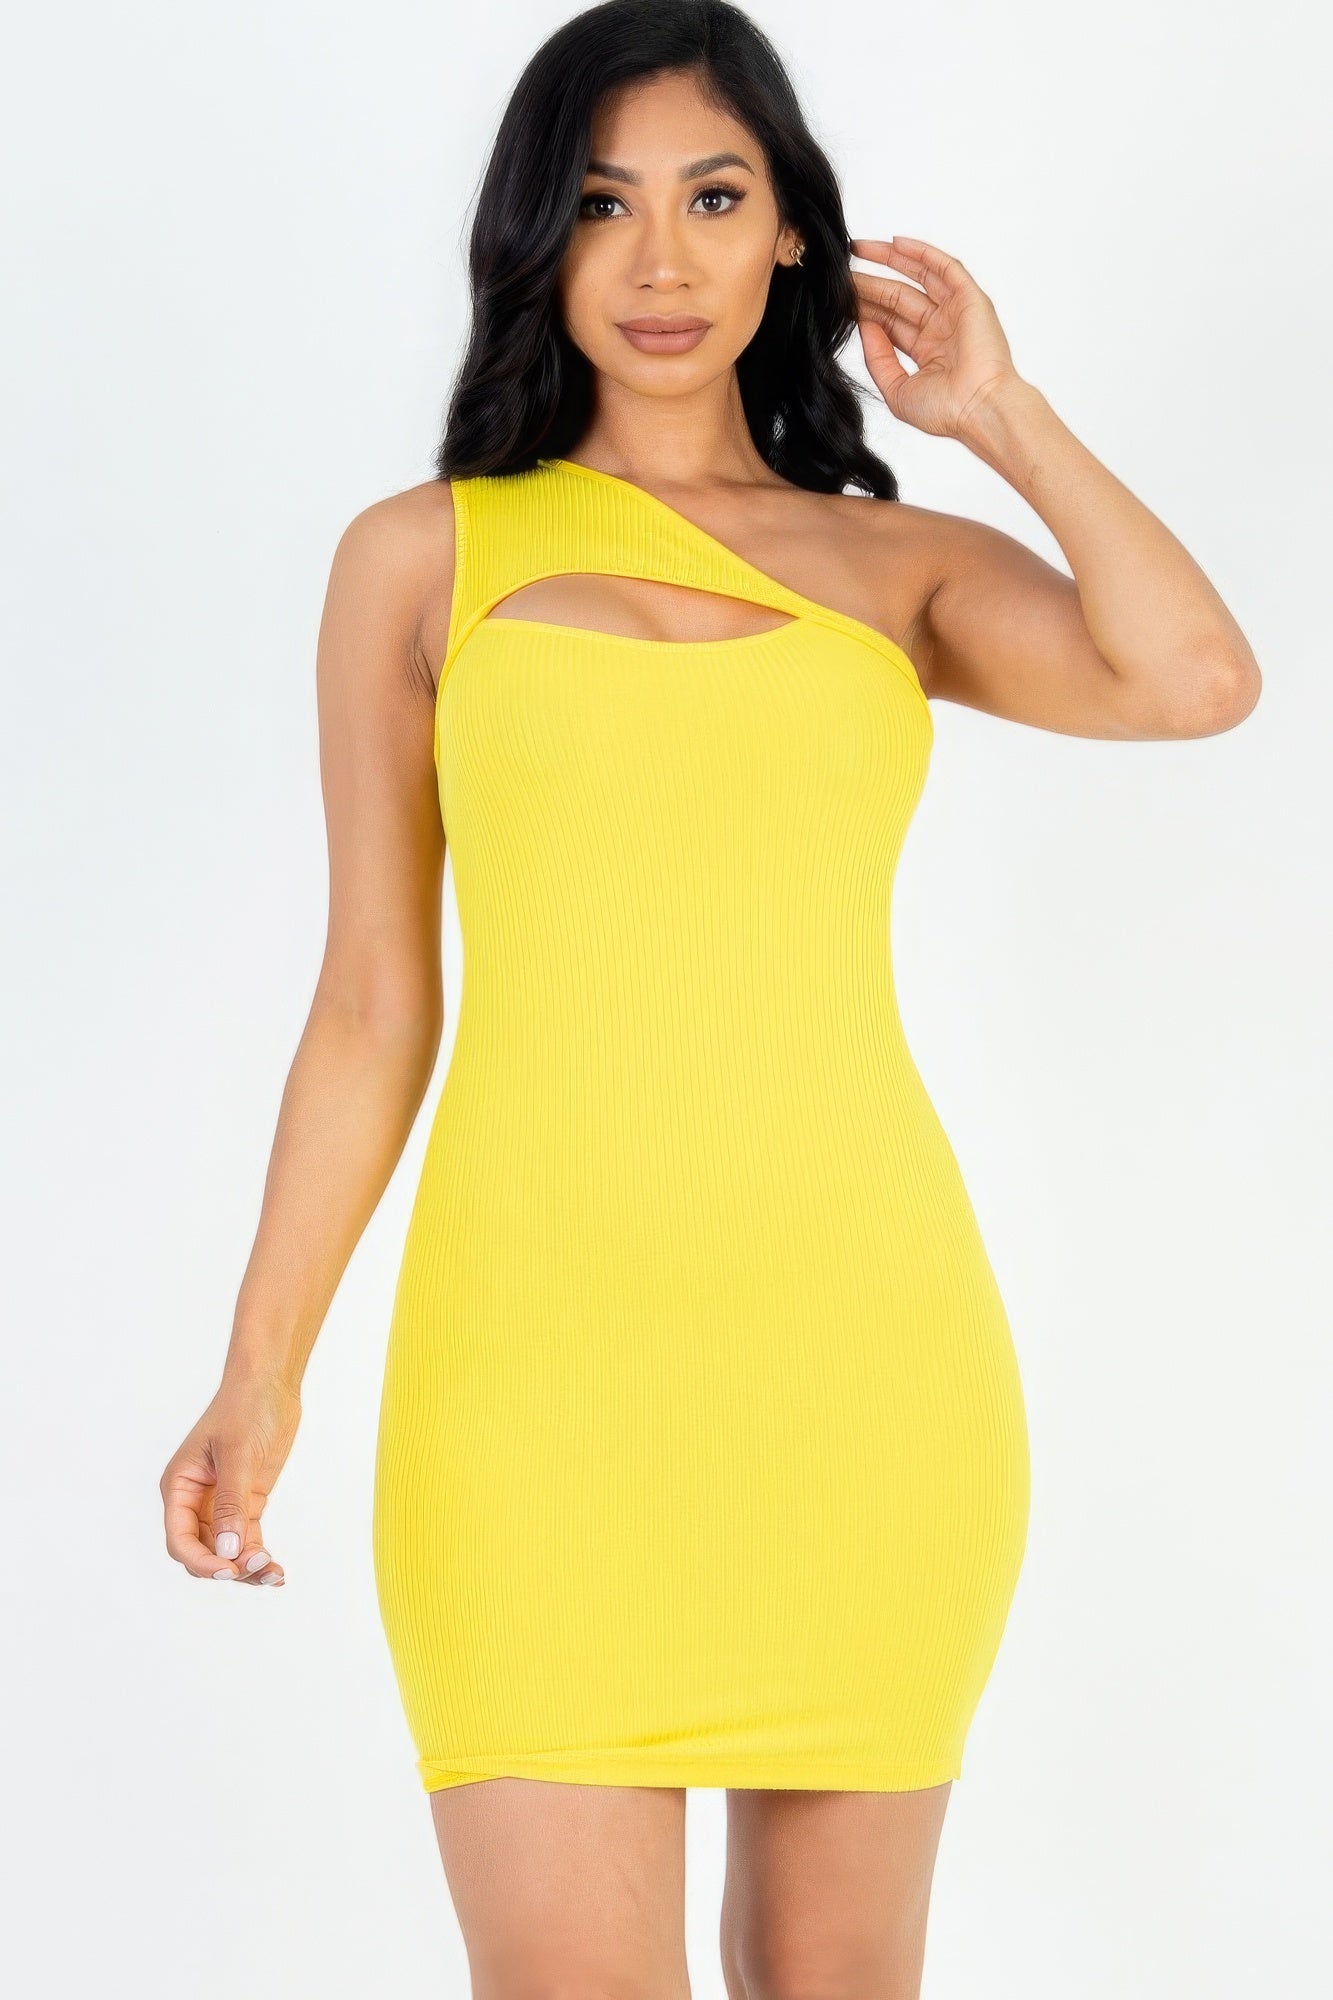 THE ZAYLEE Ribbed One Shoulder Cutout Front Mini Bodycon Dress